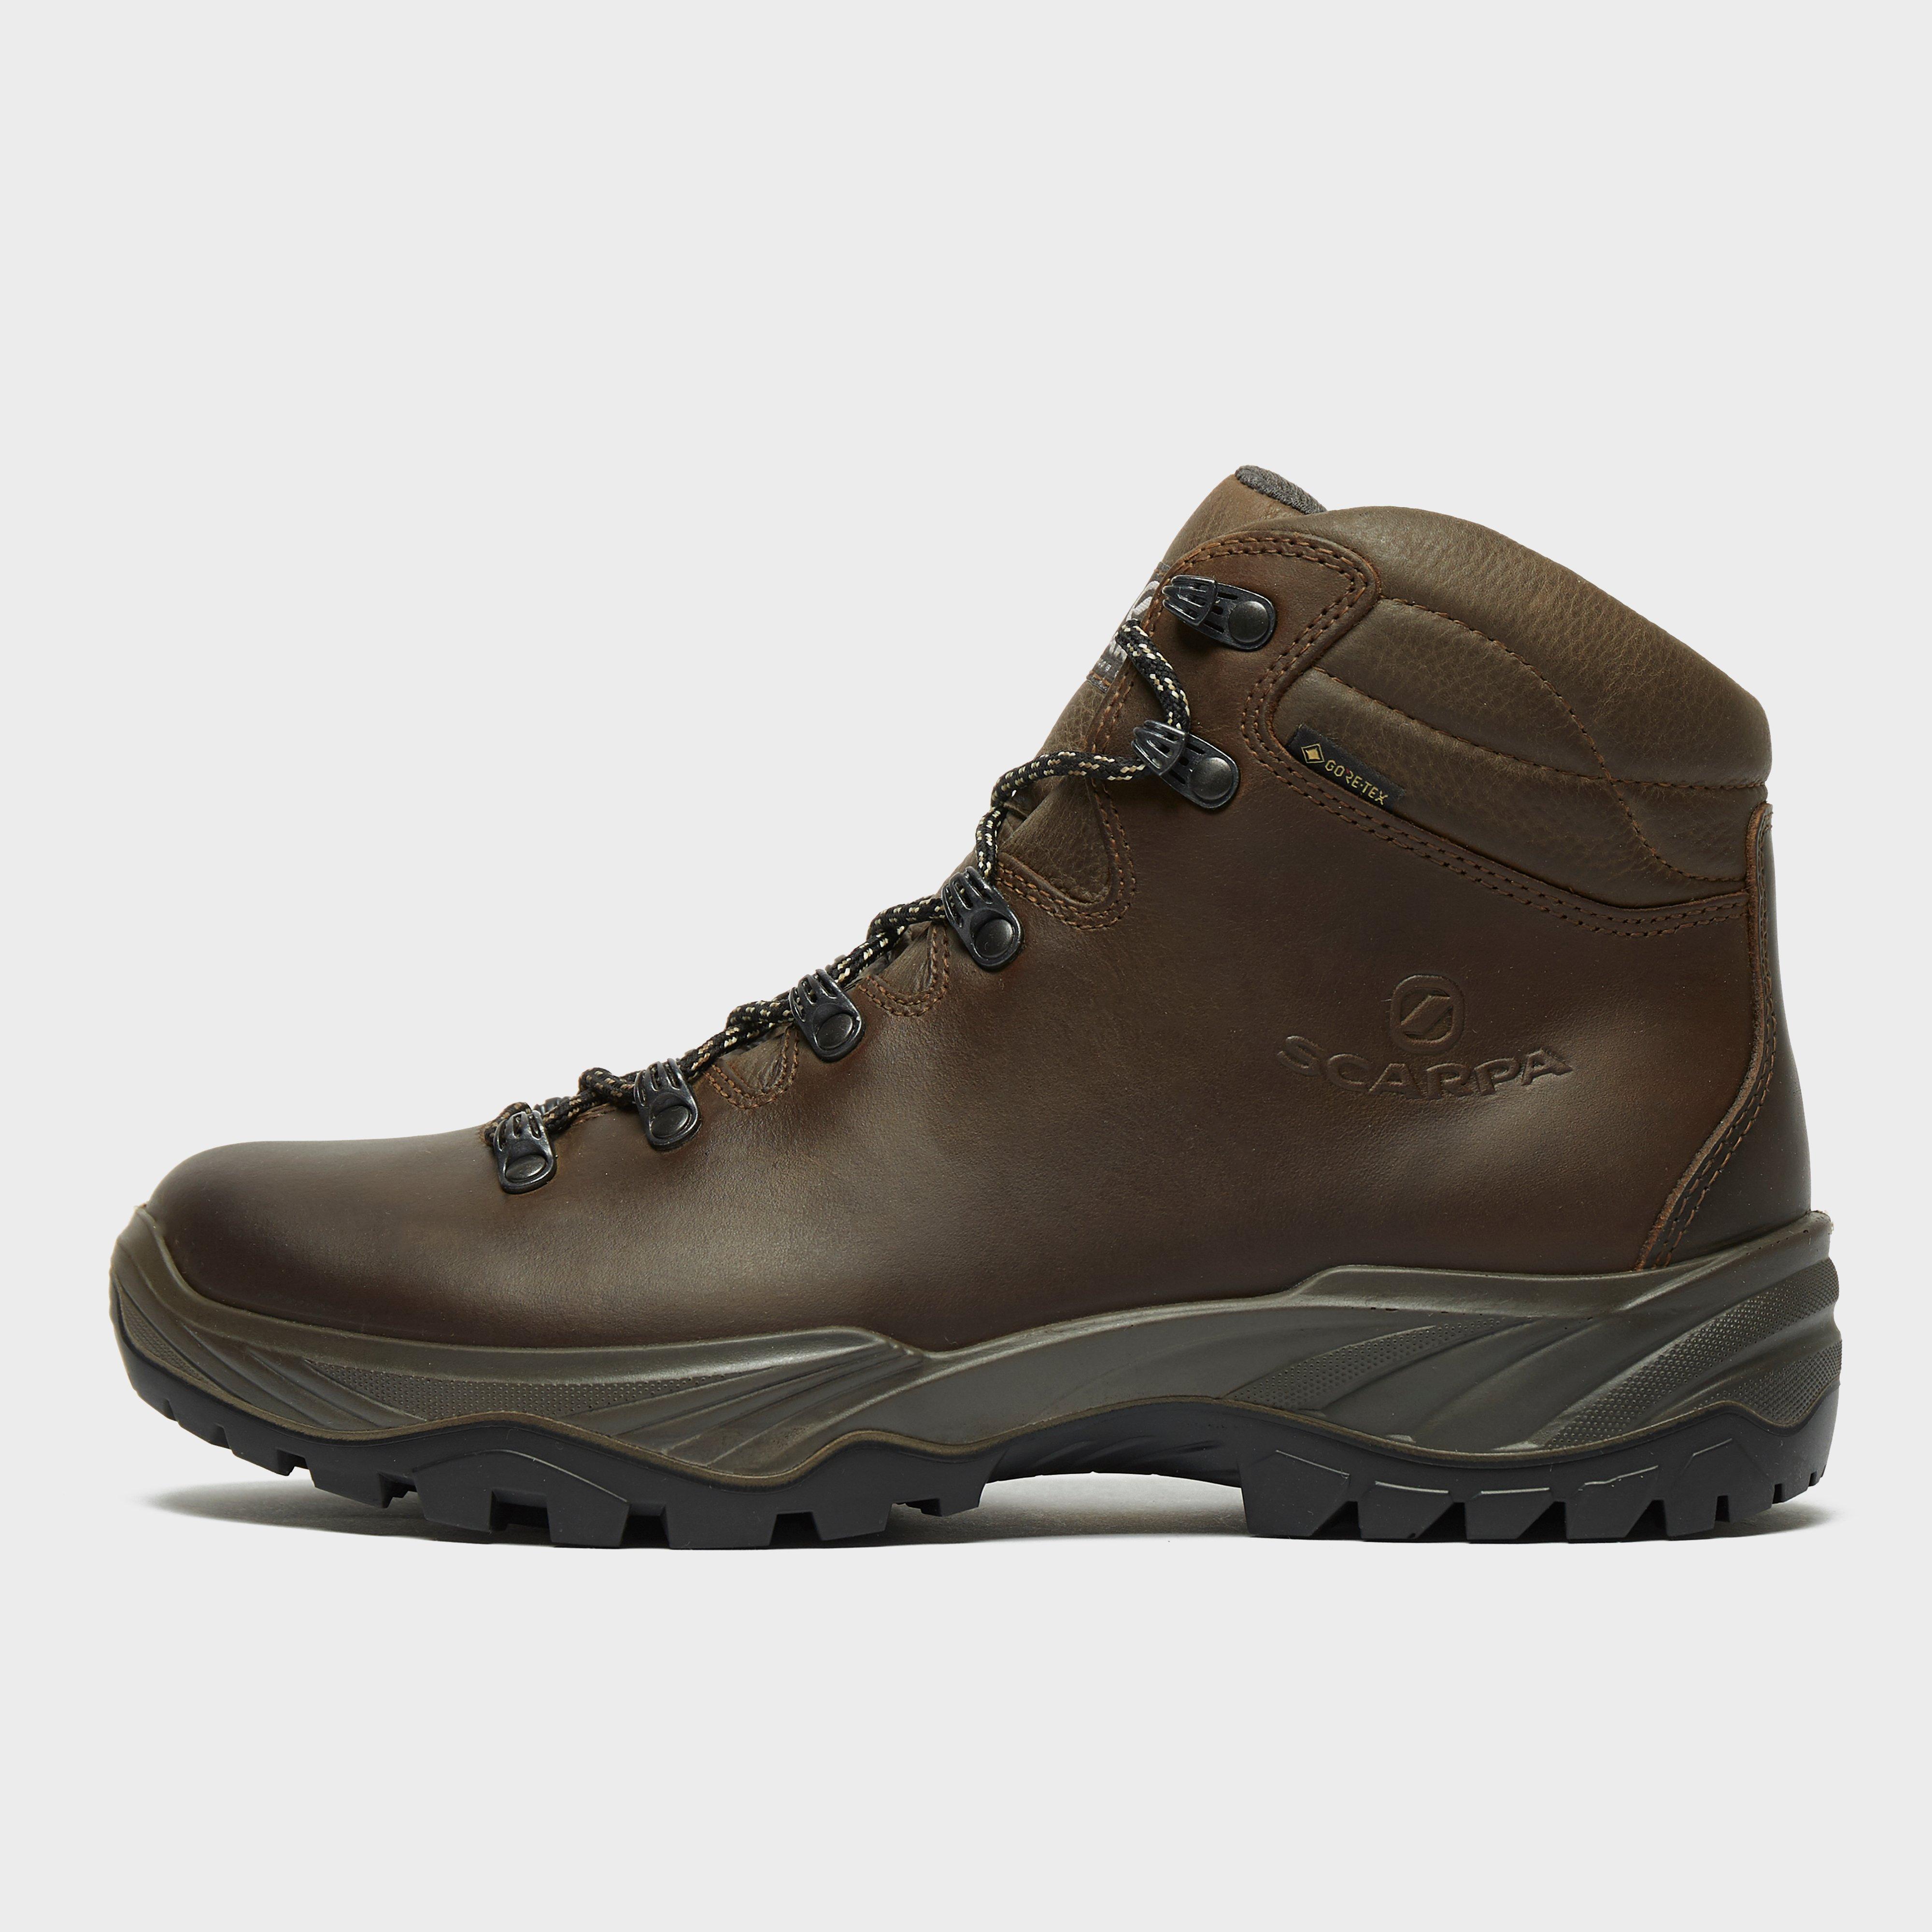 mens walking boots go outdoors off 66 